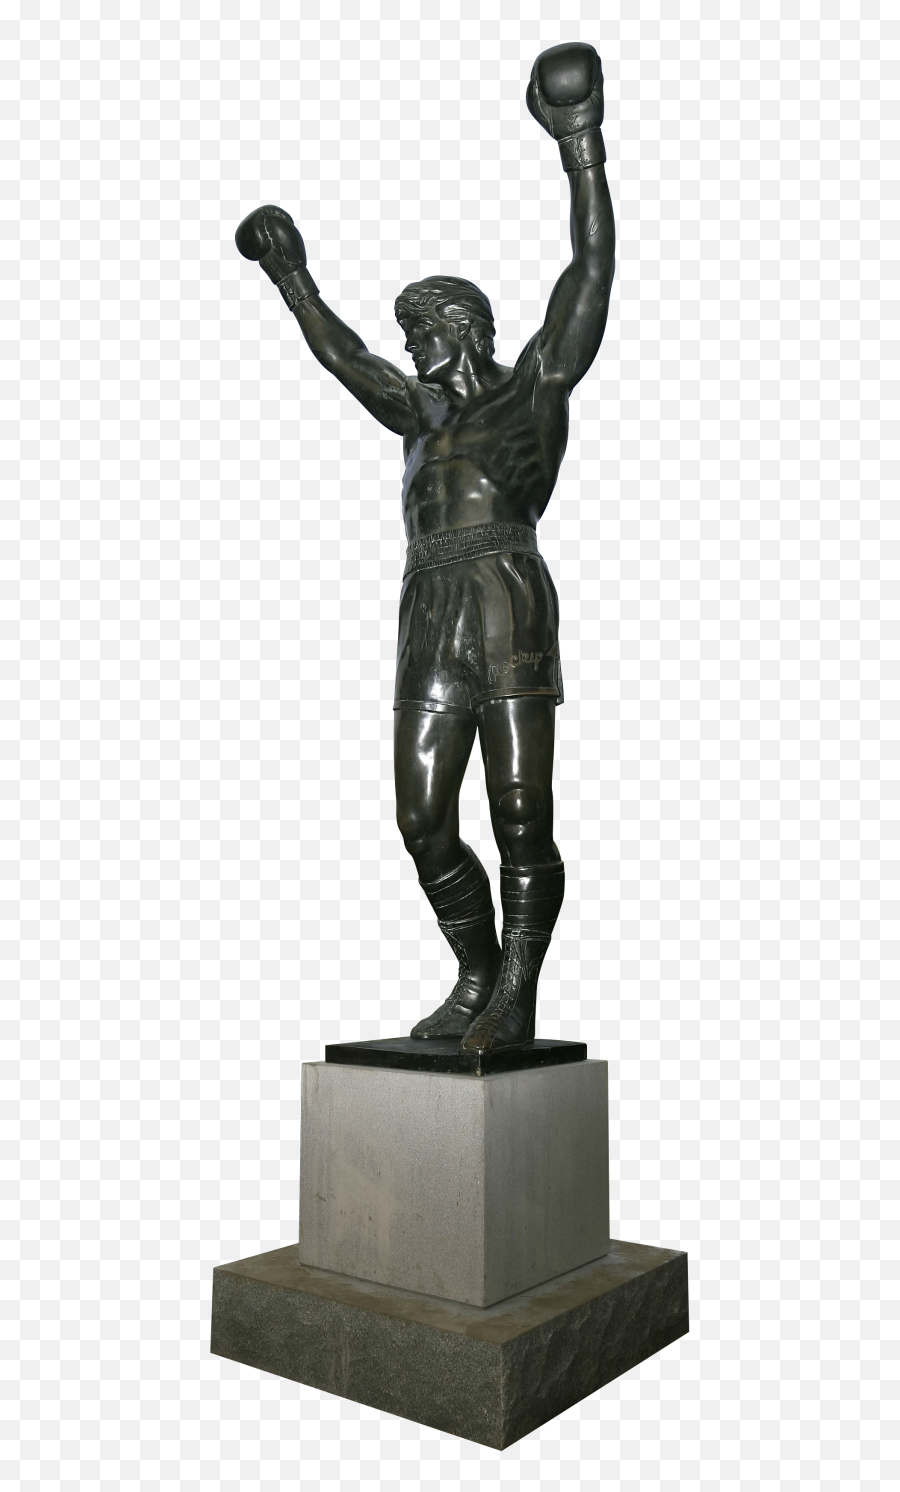 Png Image Free Download Searchpng - East Fairmount Park,Statue Png